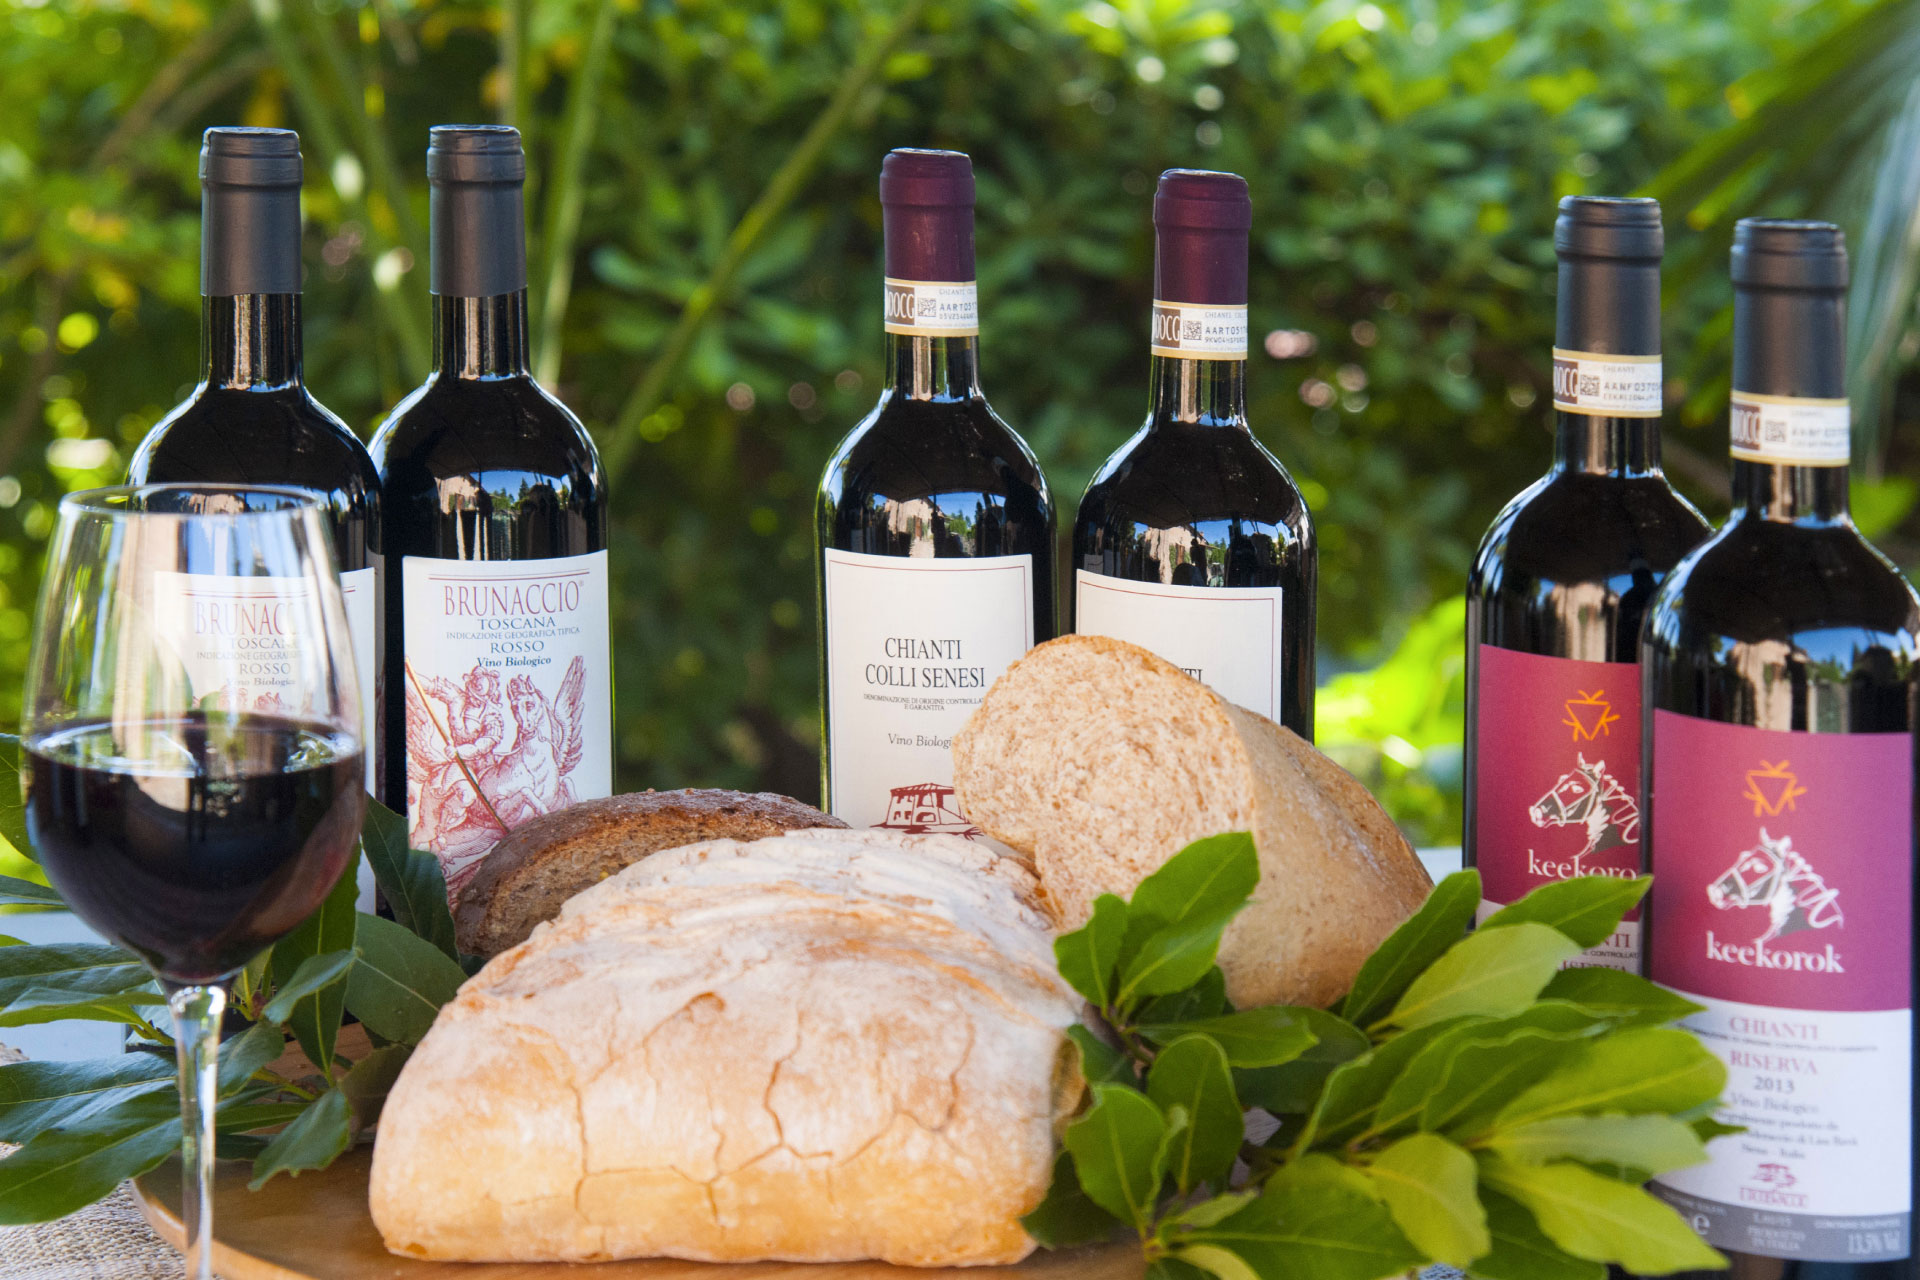 The fine wine tasting at Italy’s finest: tours and degustations in Montemaggio